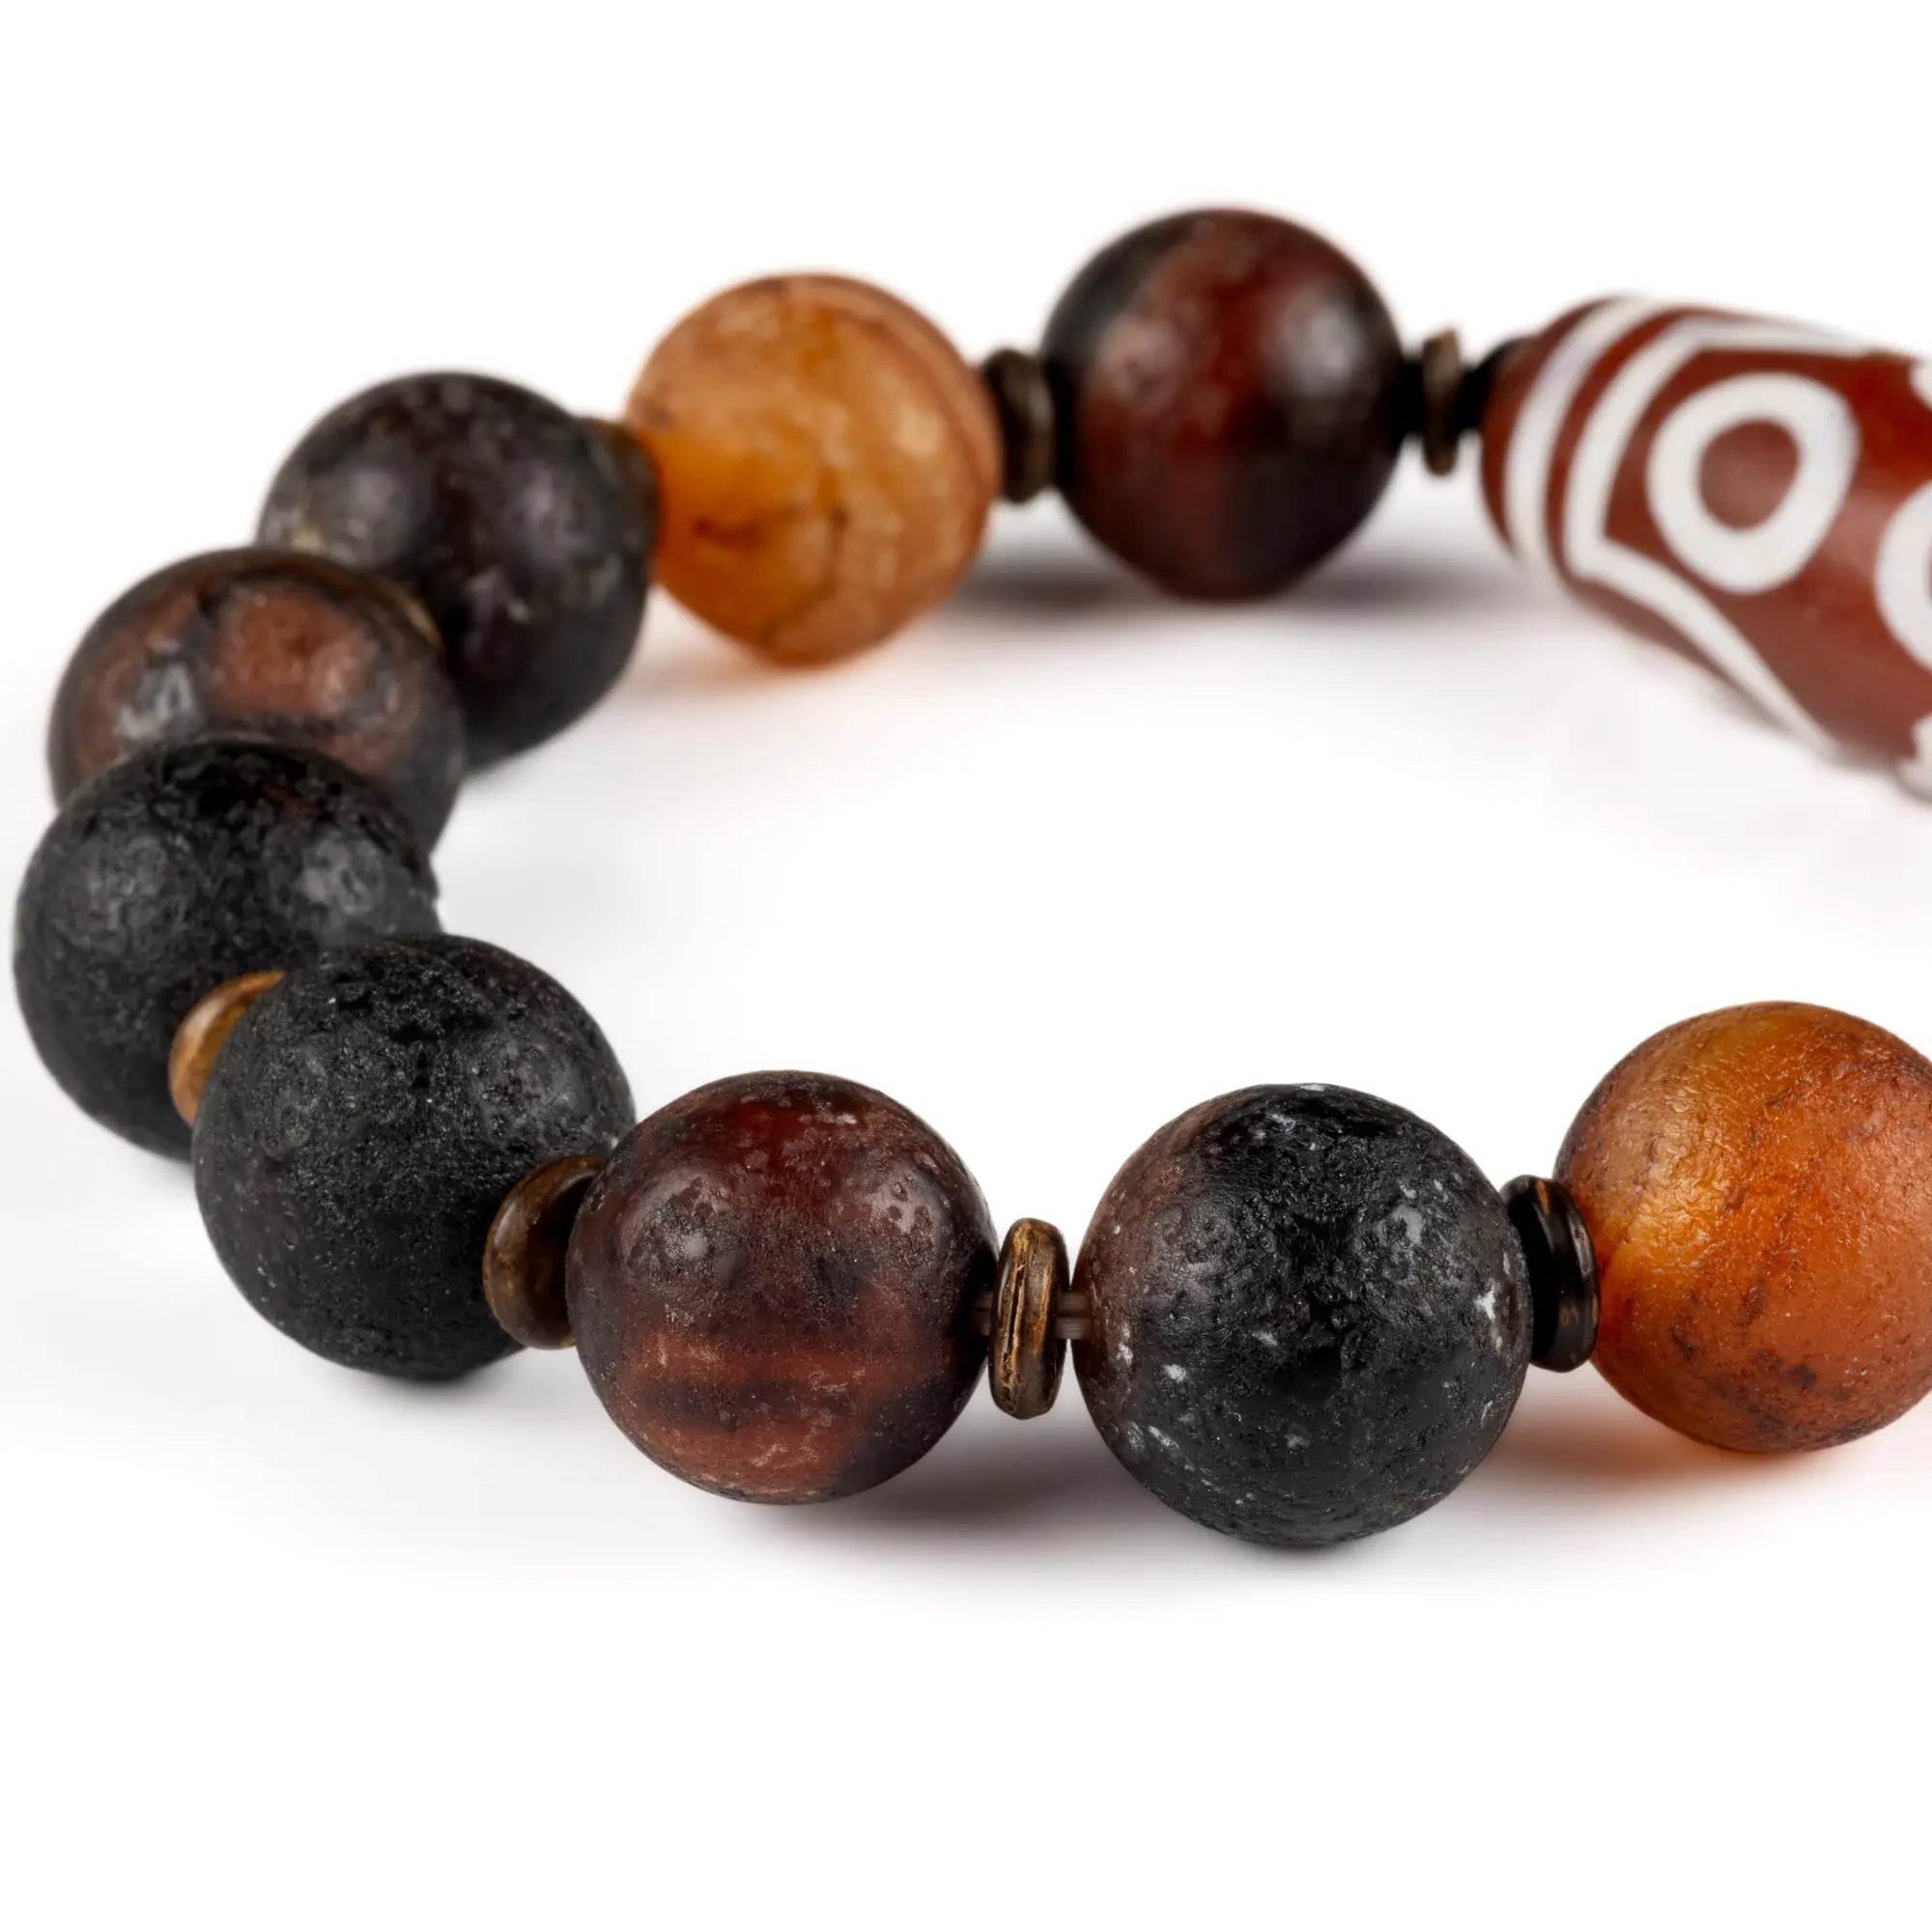 Tibetan Red Dzi and Natural Black Agate Bracelet - Spiritual Protection & Authentic Beauty